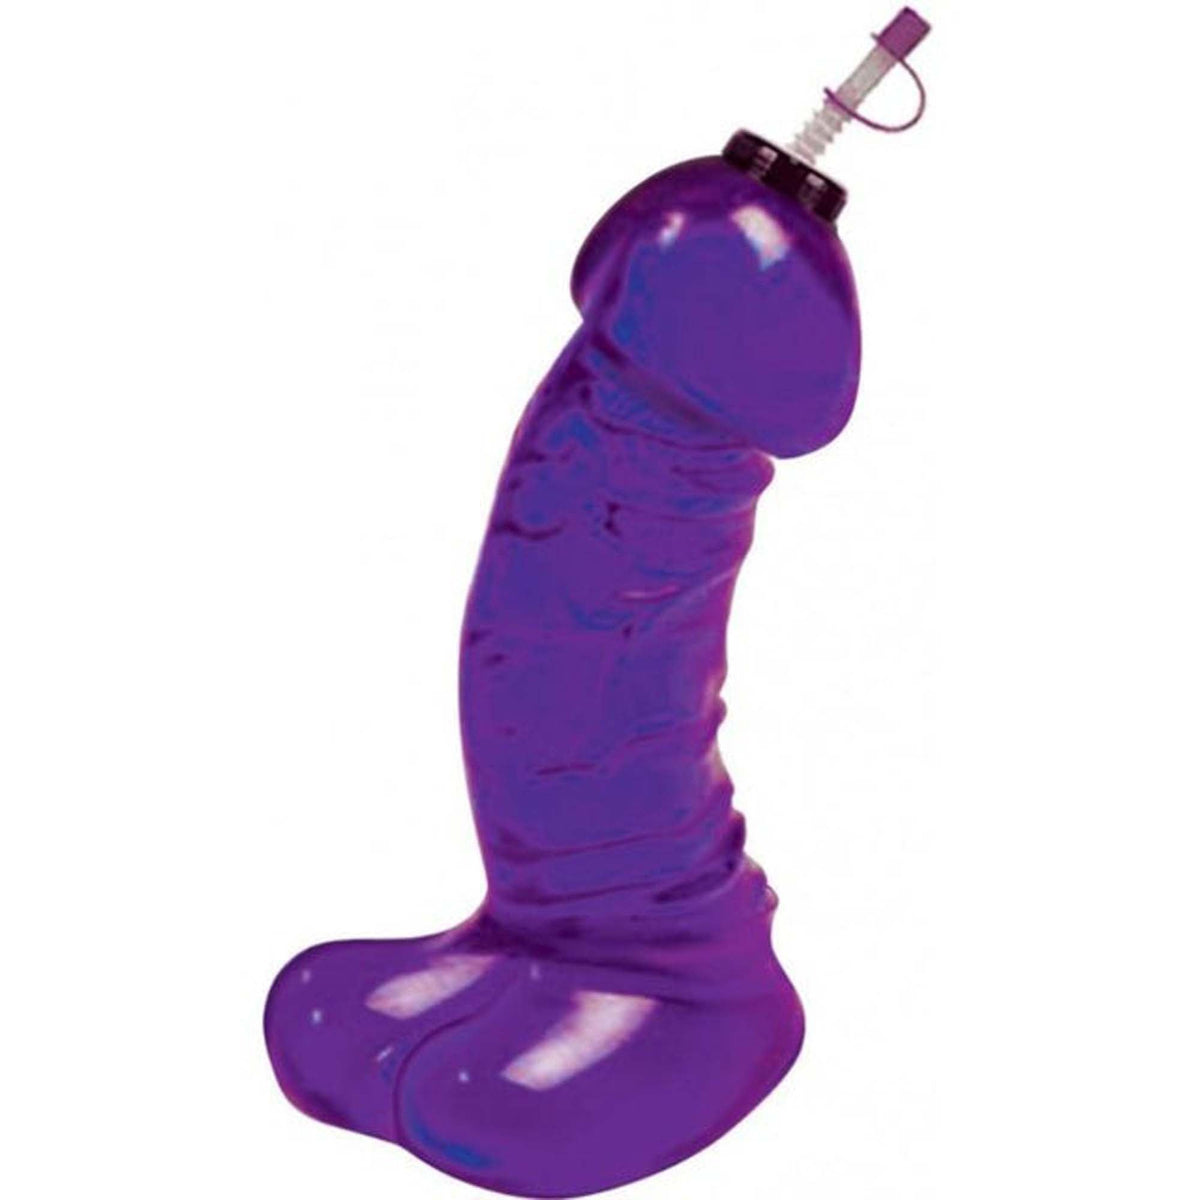 EP Product Canada INC. Bachelorette Bachelorette Party Purple Dicky Chug Bottle with Straw, 16 Oz, 1 Count 818631021116